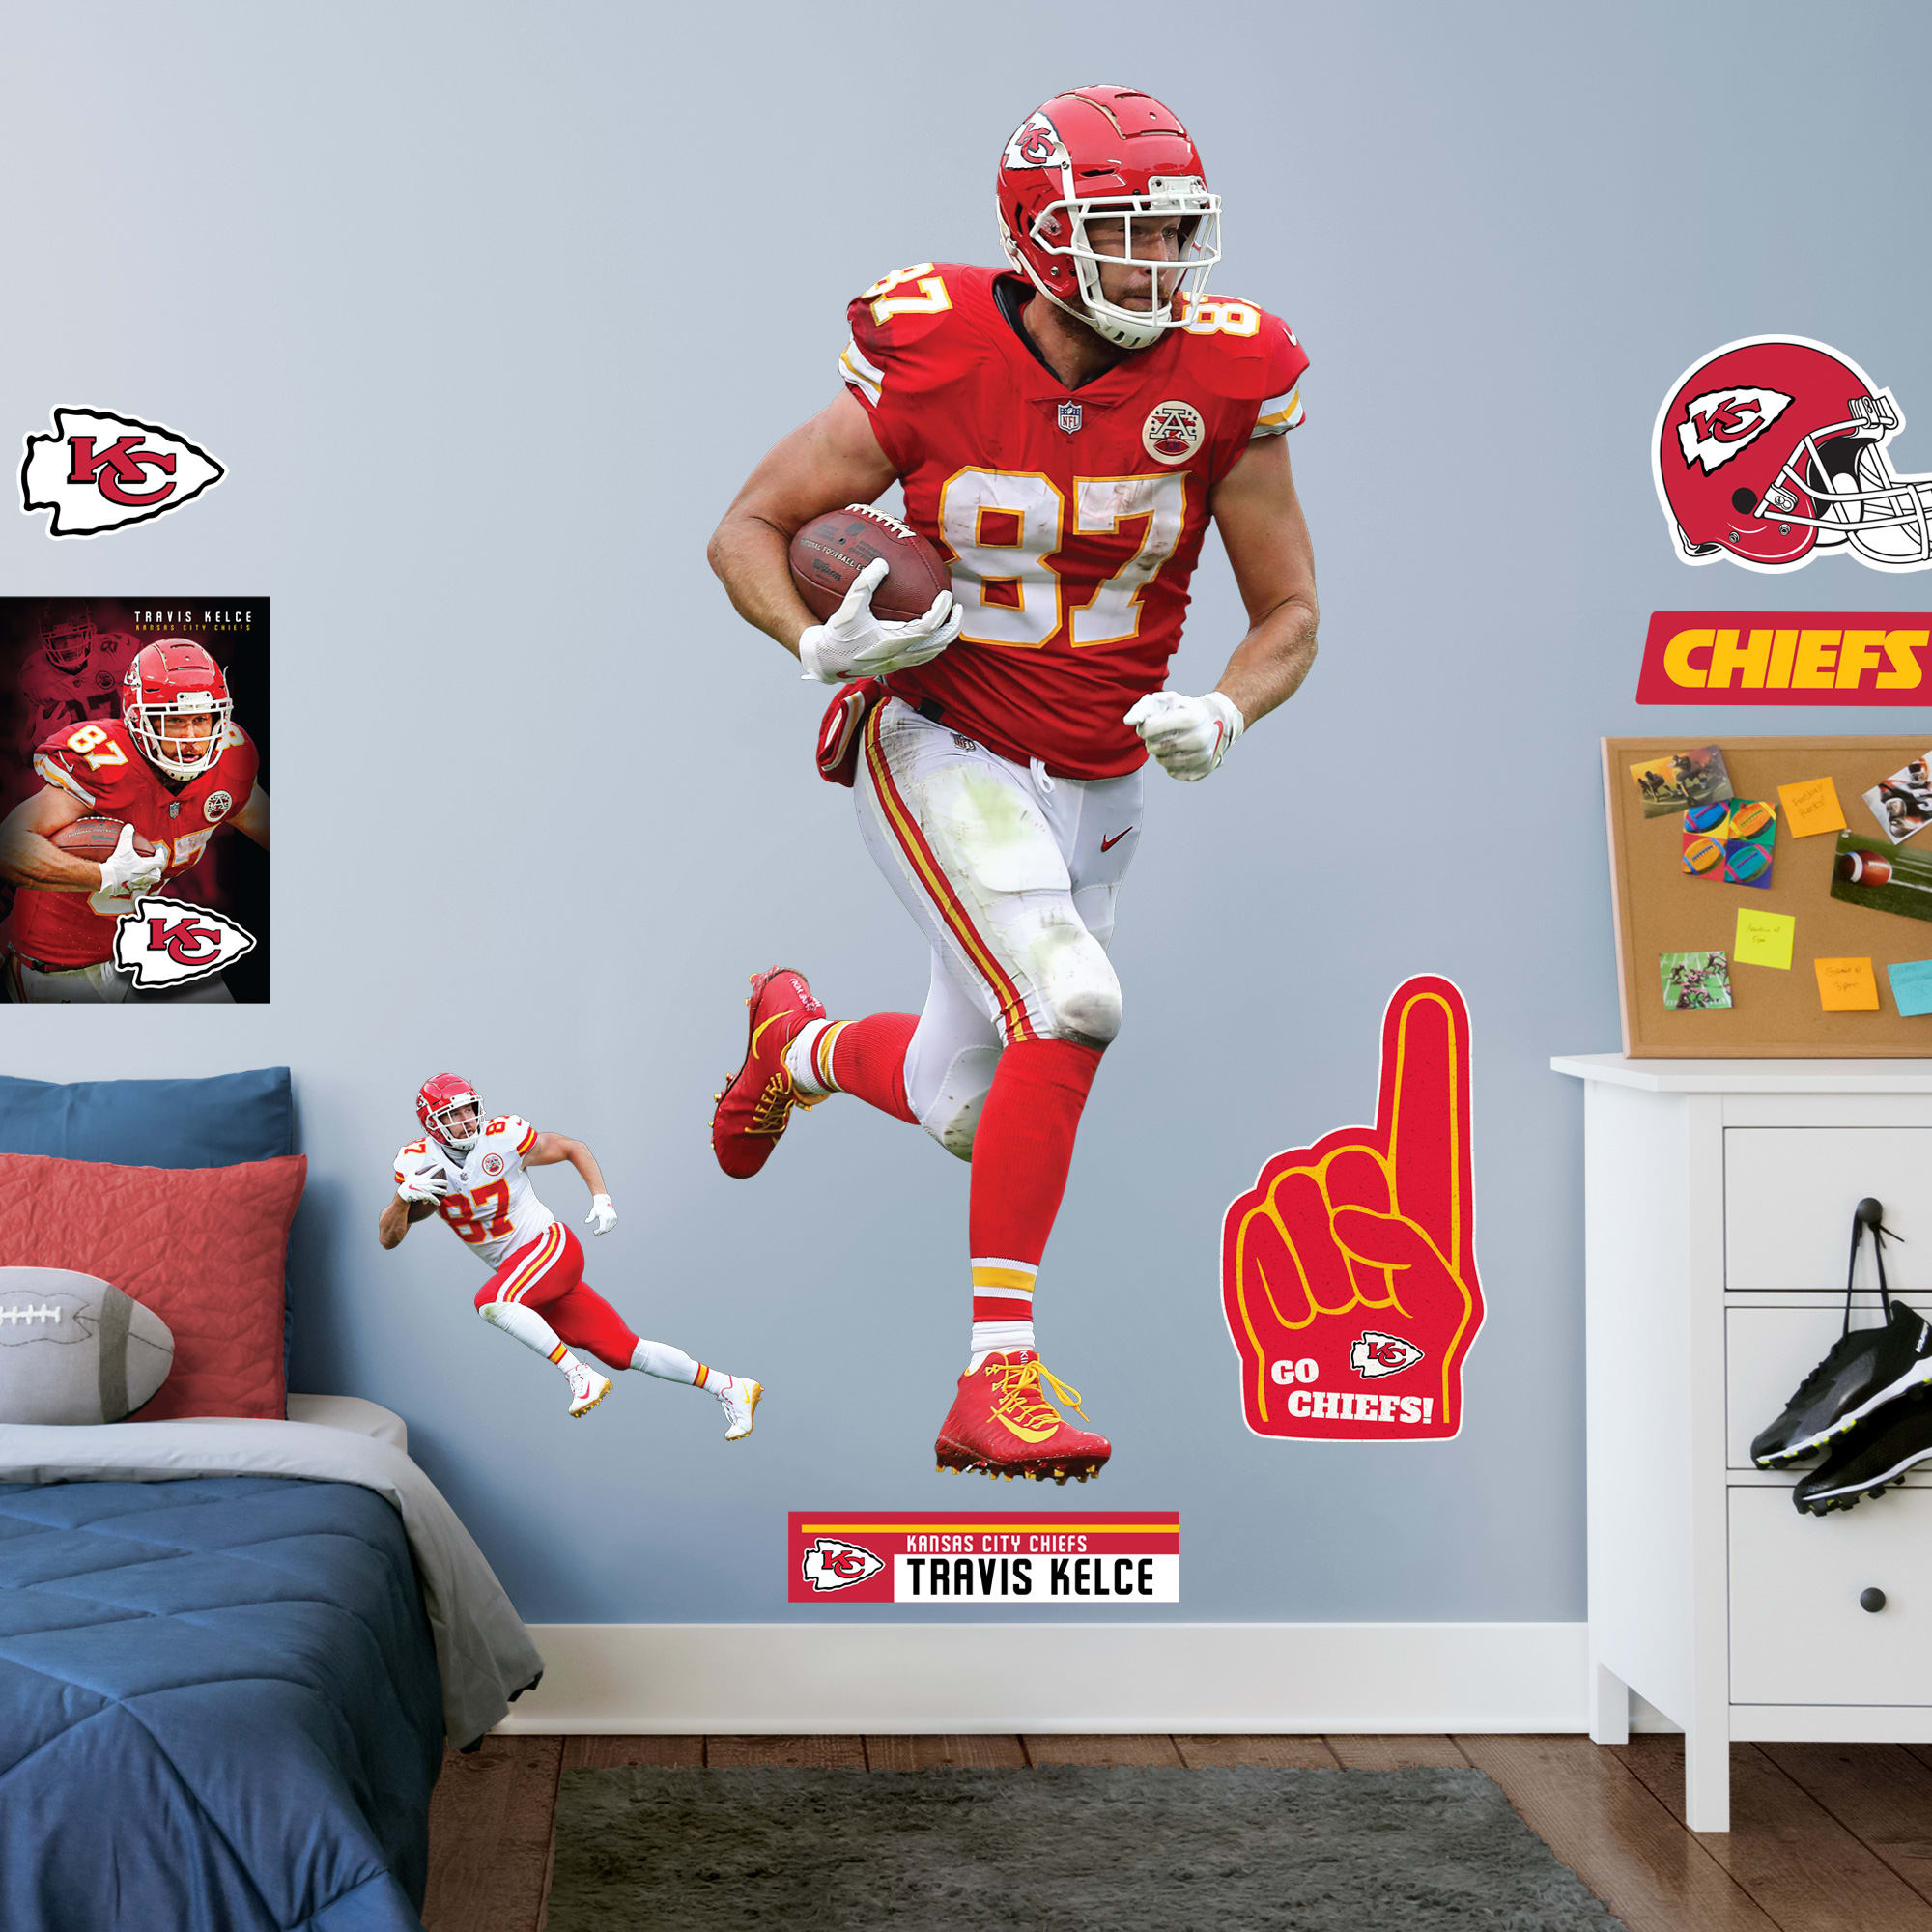 Travis Kelce for Kansas City Chiefs: Home - Officially Licensed NFL Removable Wall Decal Life-Size Athlete + 9 Decals (34"W x 78